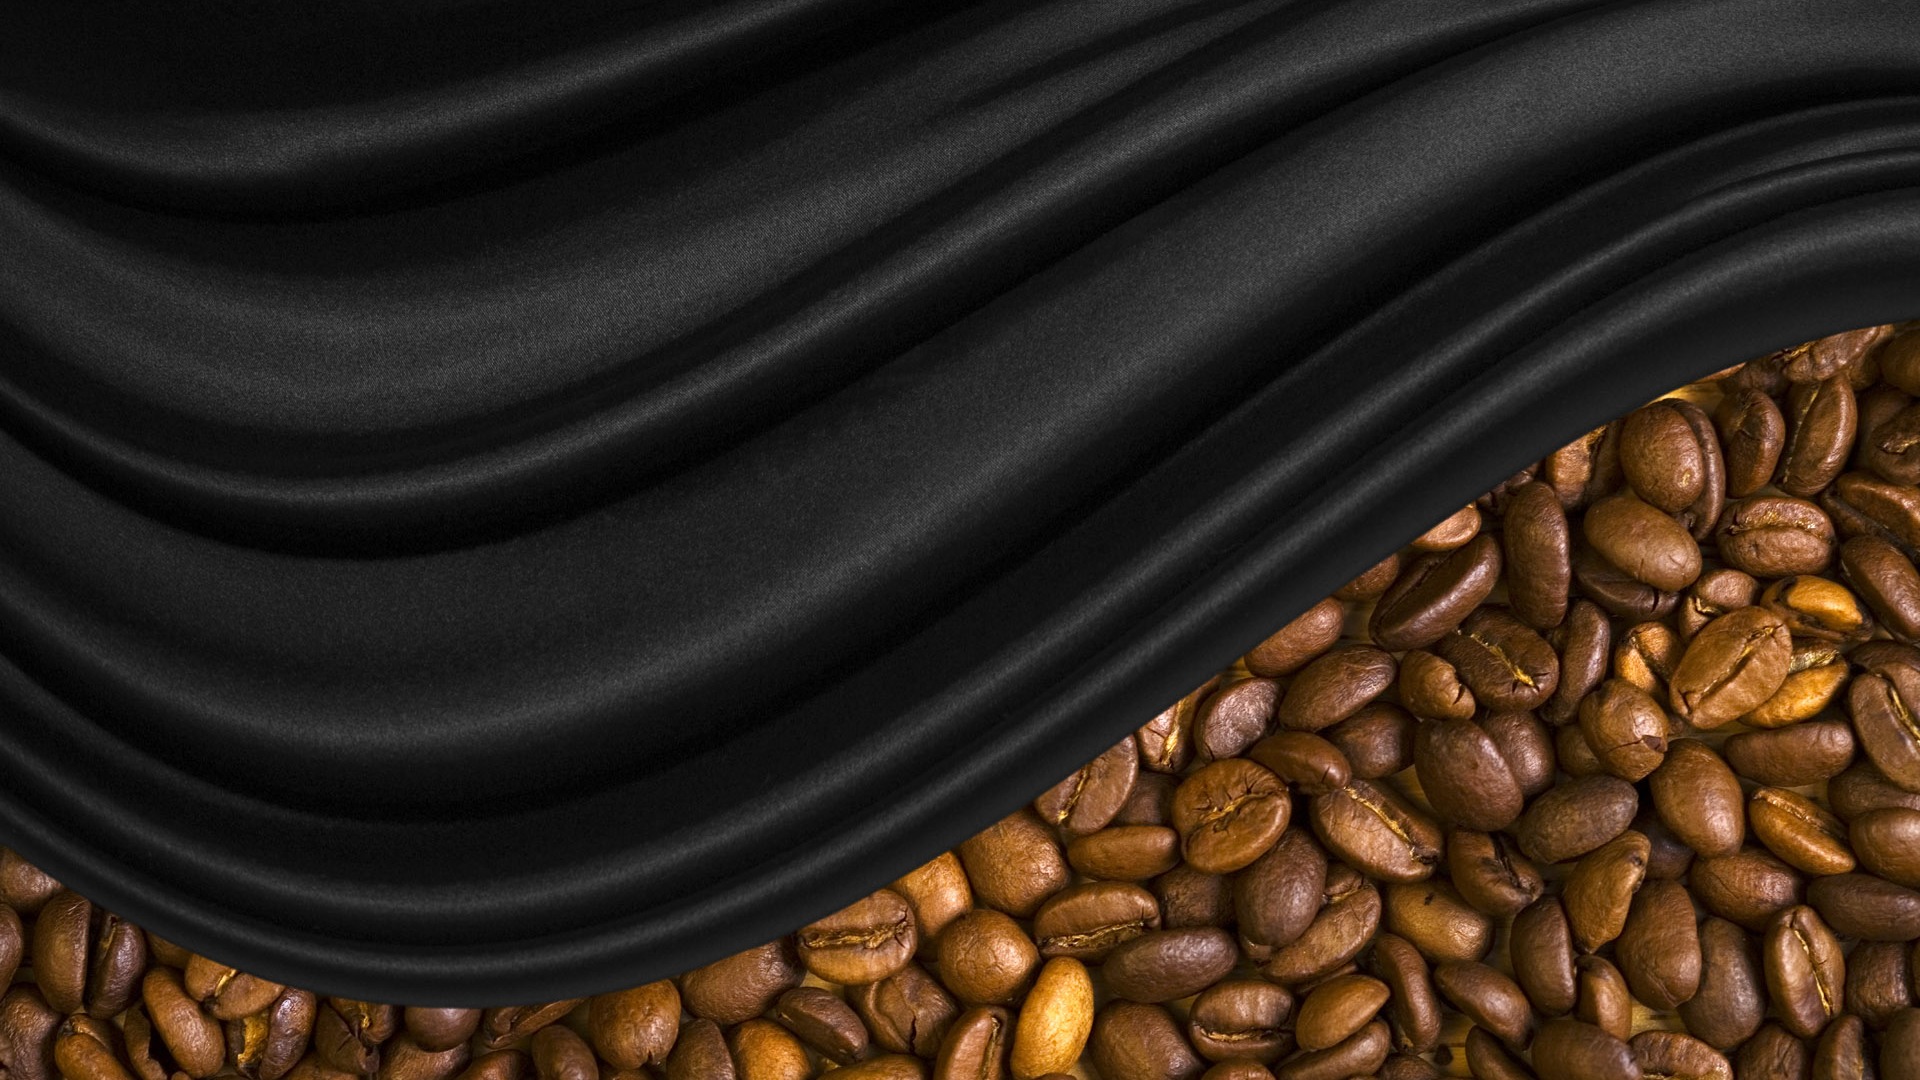 Coffee feature wallpaper (5) #17 - 1920x1080